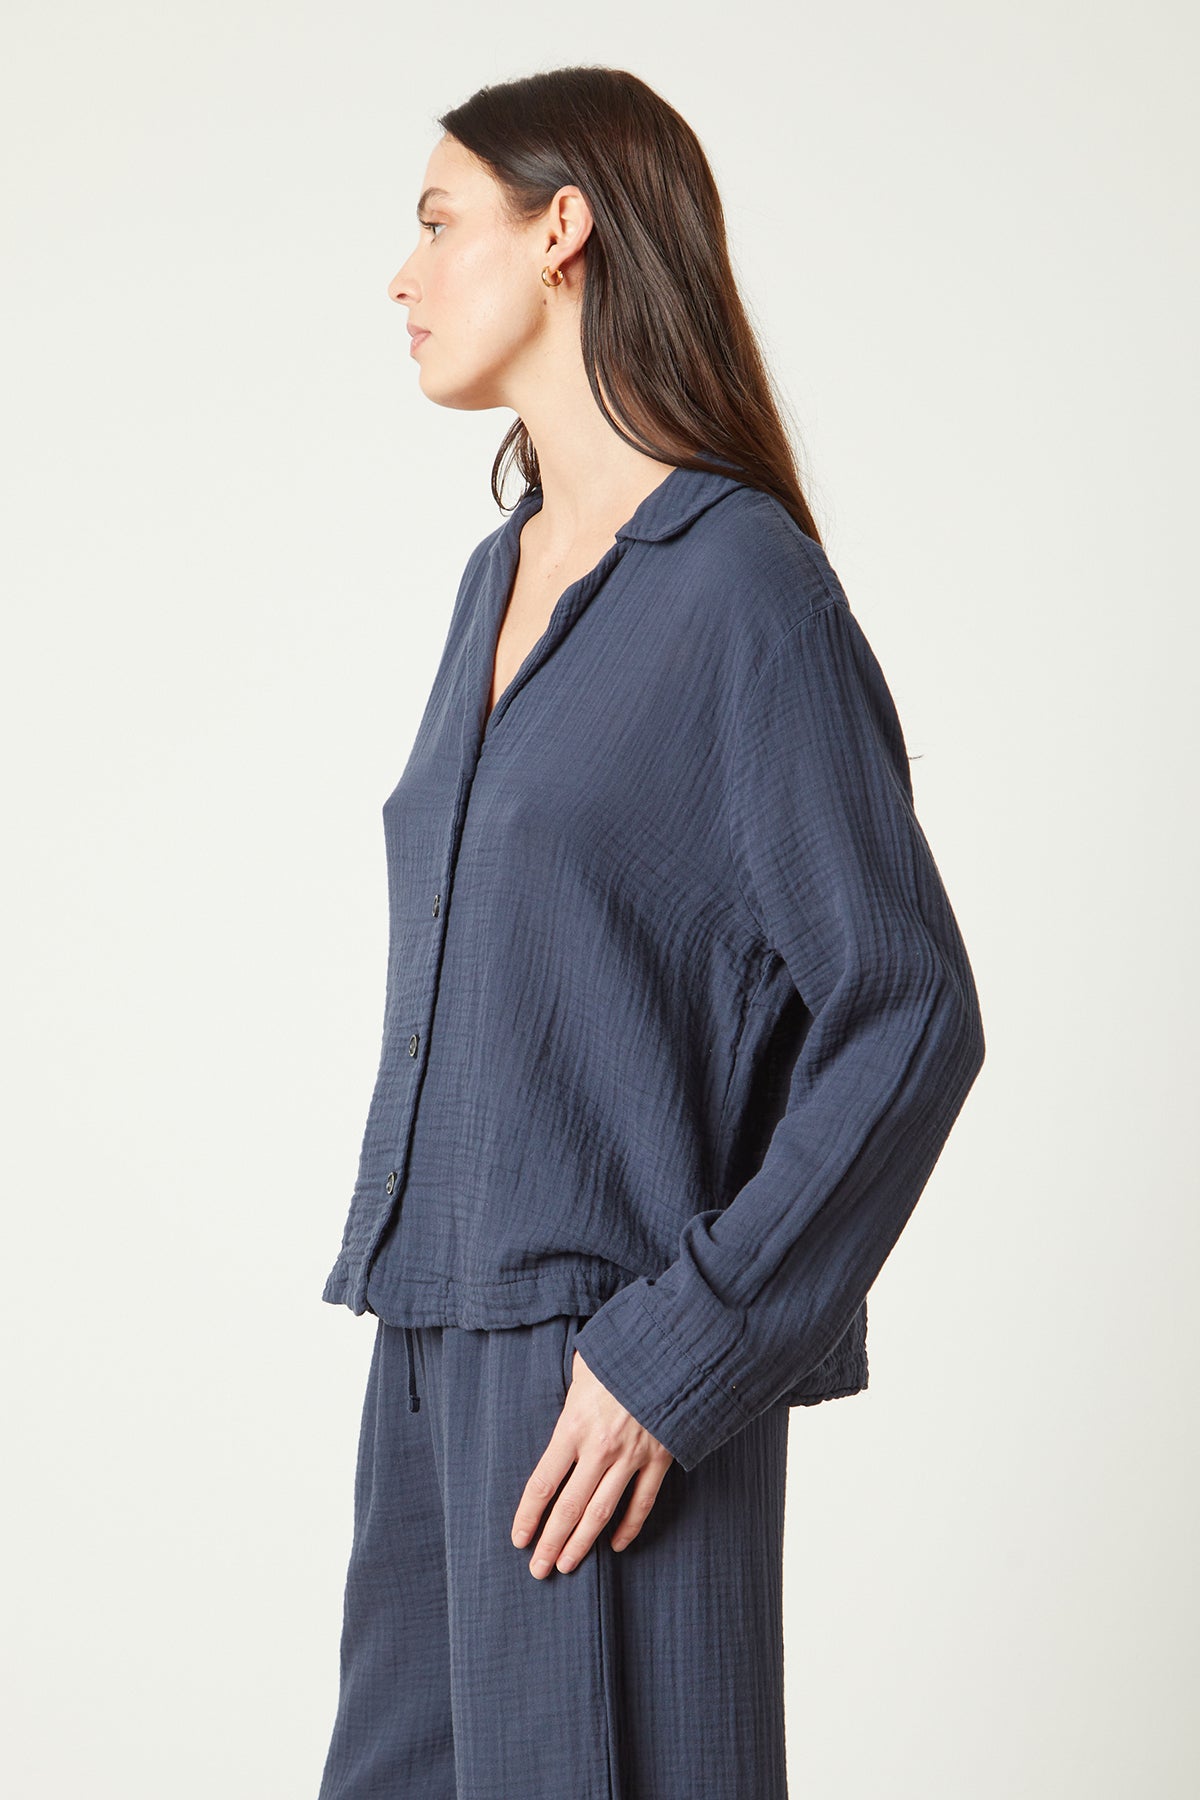   the model is wearing a blue Jenny Graham Home PAJAMA SHIRT and pants. 